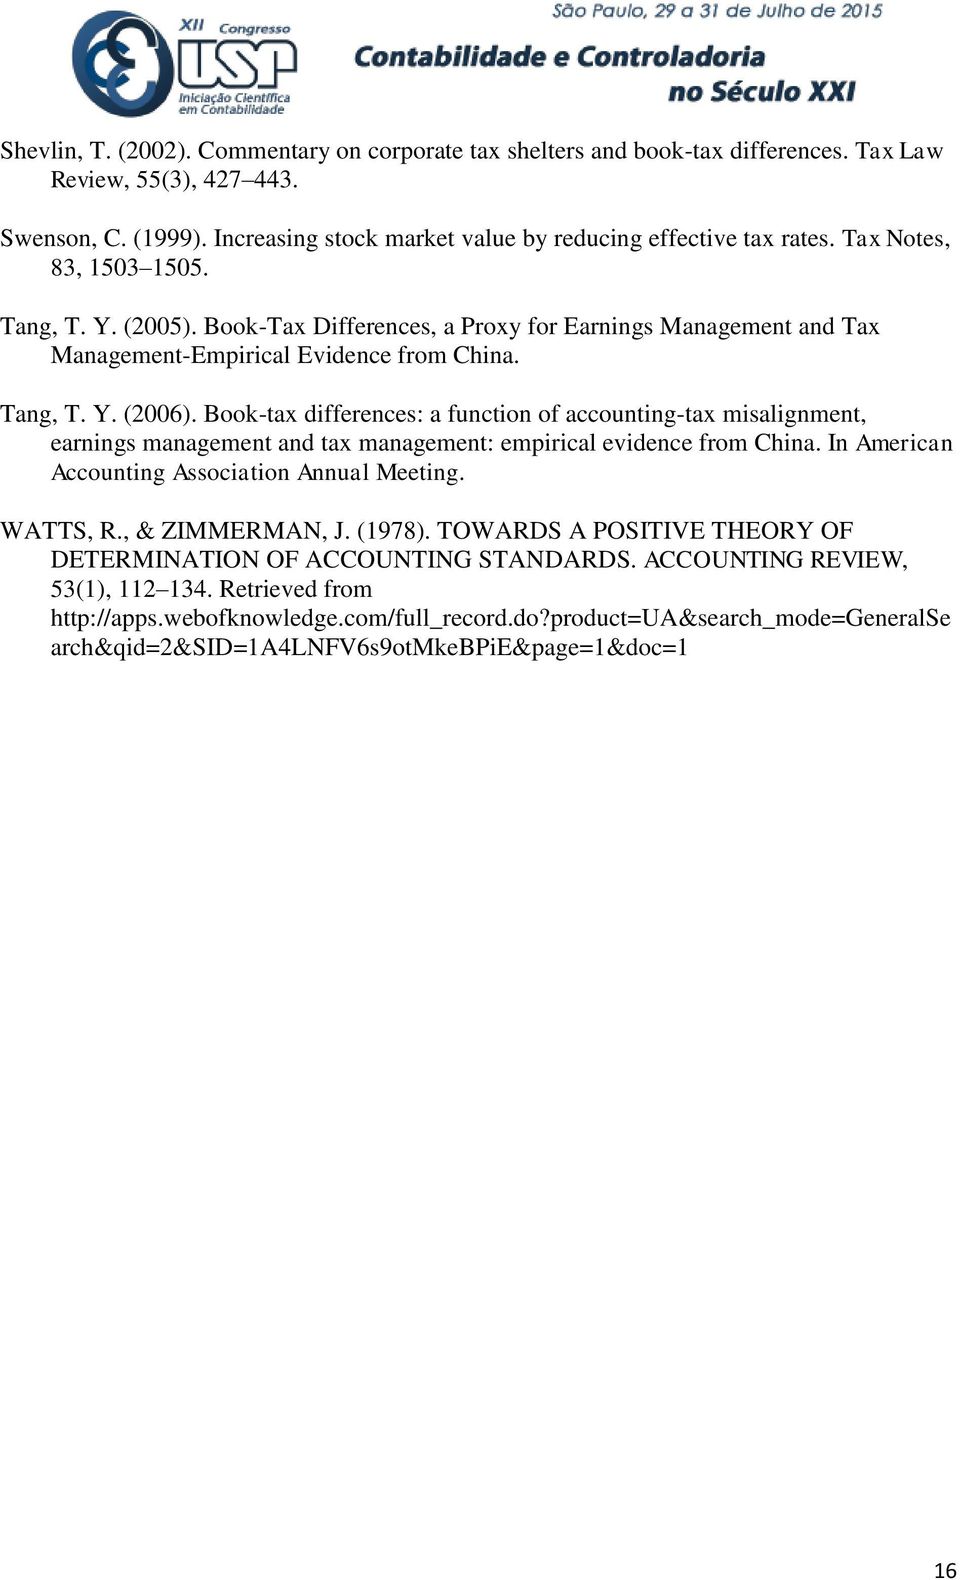 Book-tax differences: a function of accounting-tax misalignment, earnings management and tax management: empirical evidence from China. In American Accounting Association Annual Meeting. WATTS, R.